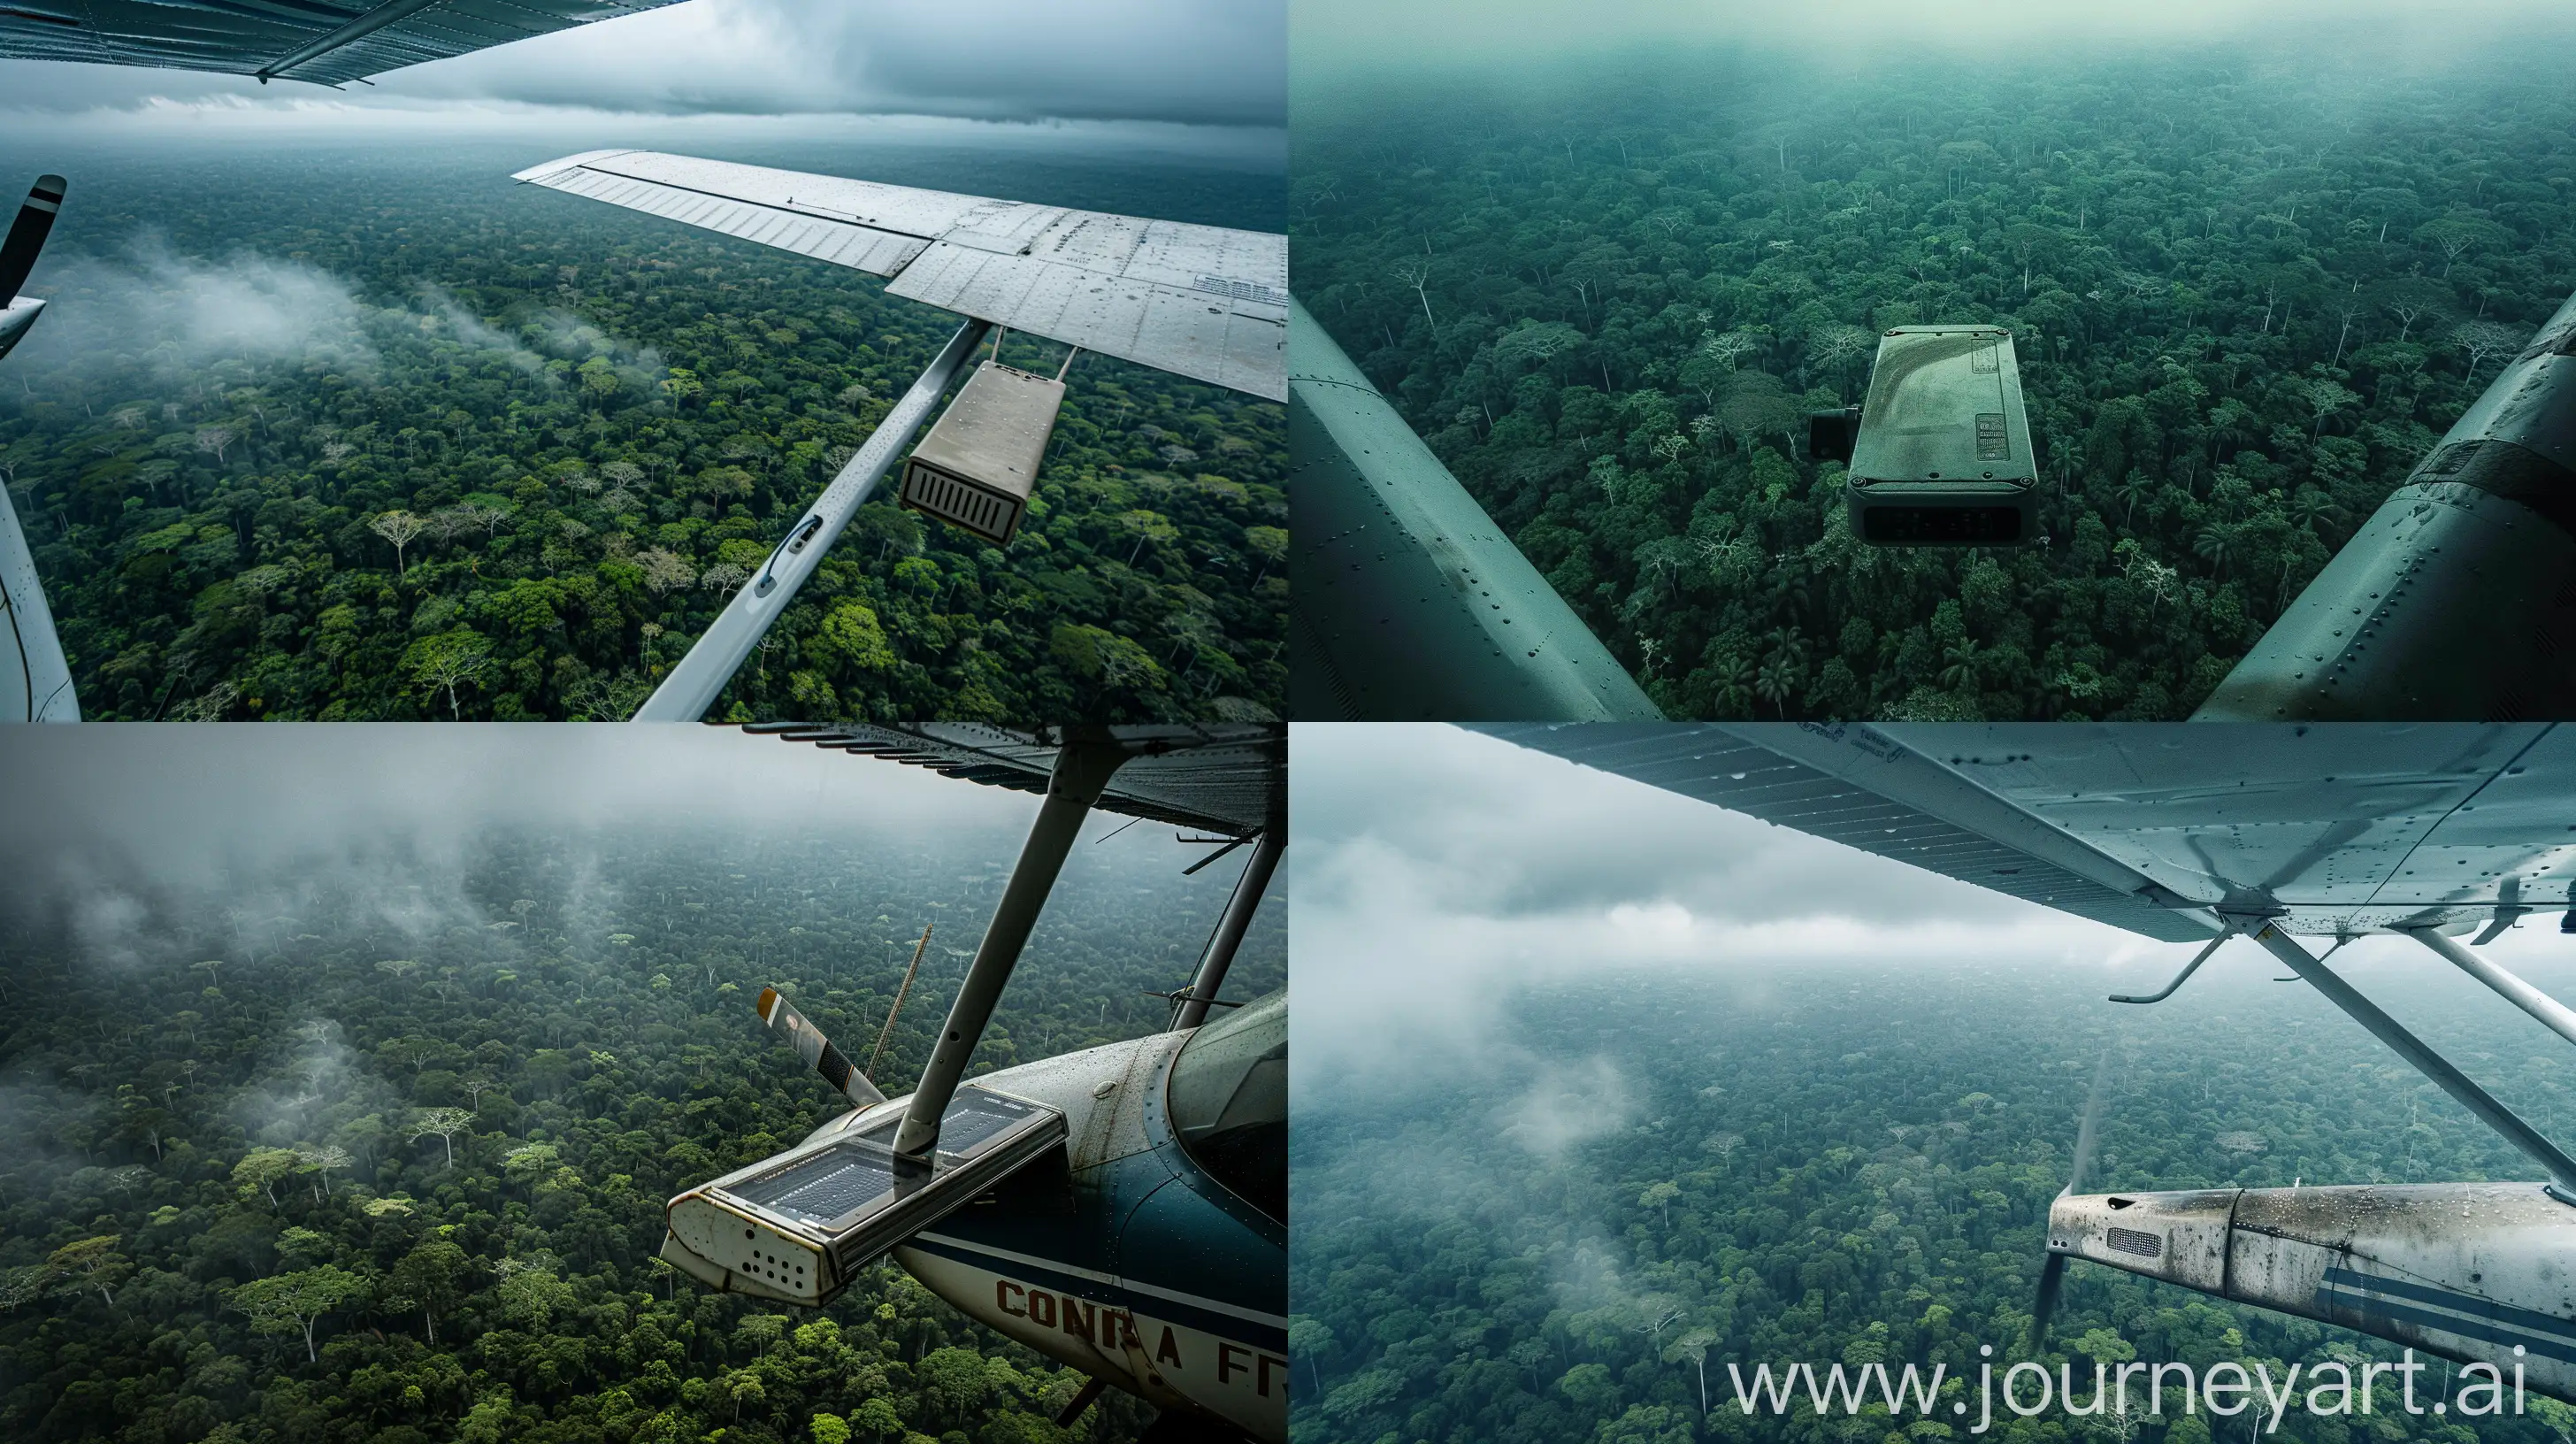 Cessna-Propeller-Aircraft-with-Lidar-Device-Over-Amazon-Rainforest